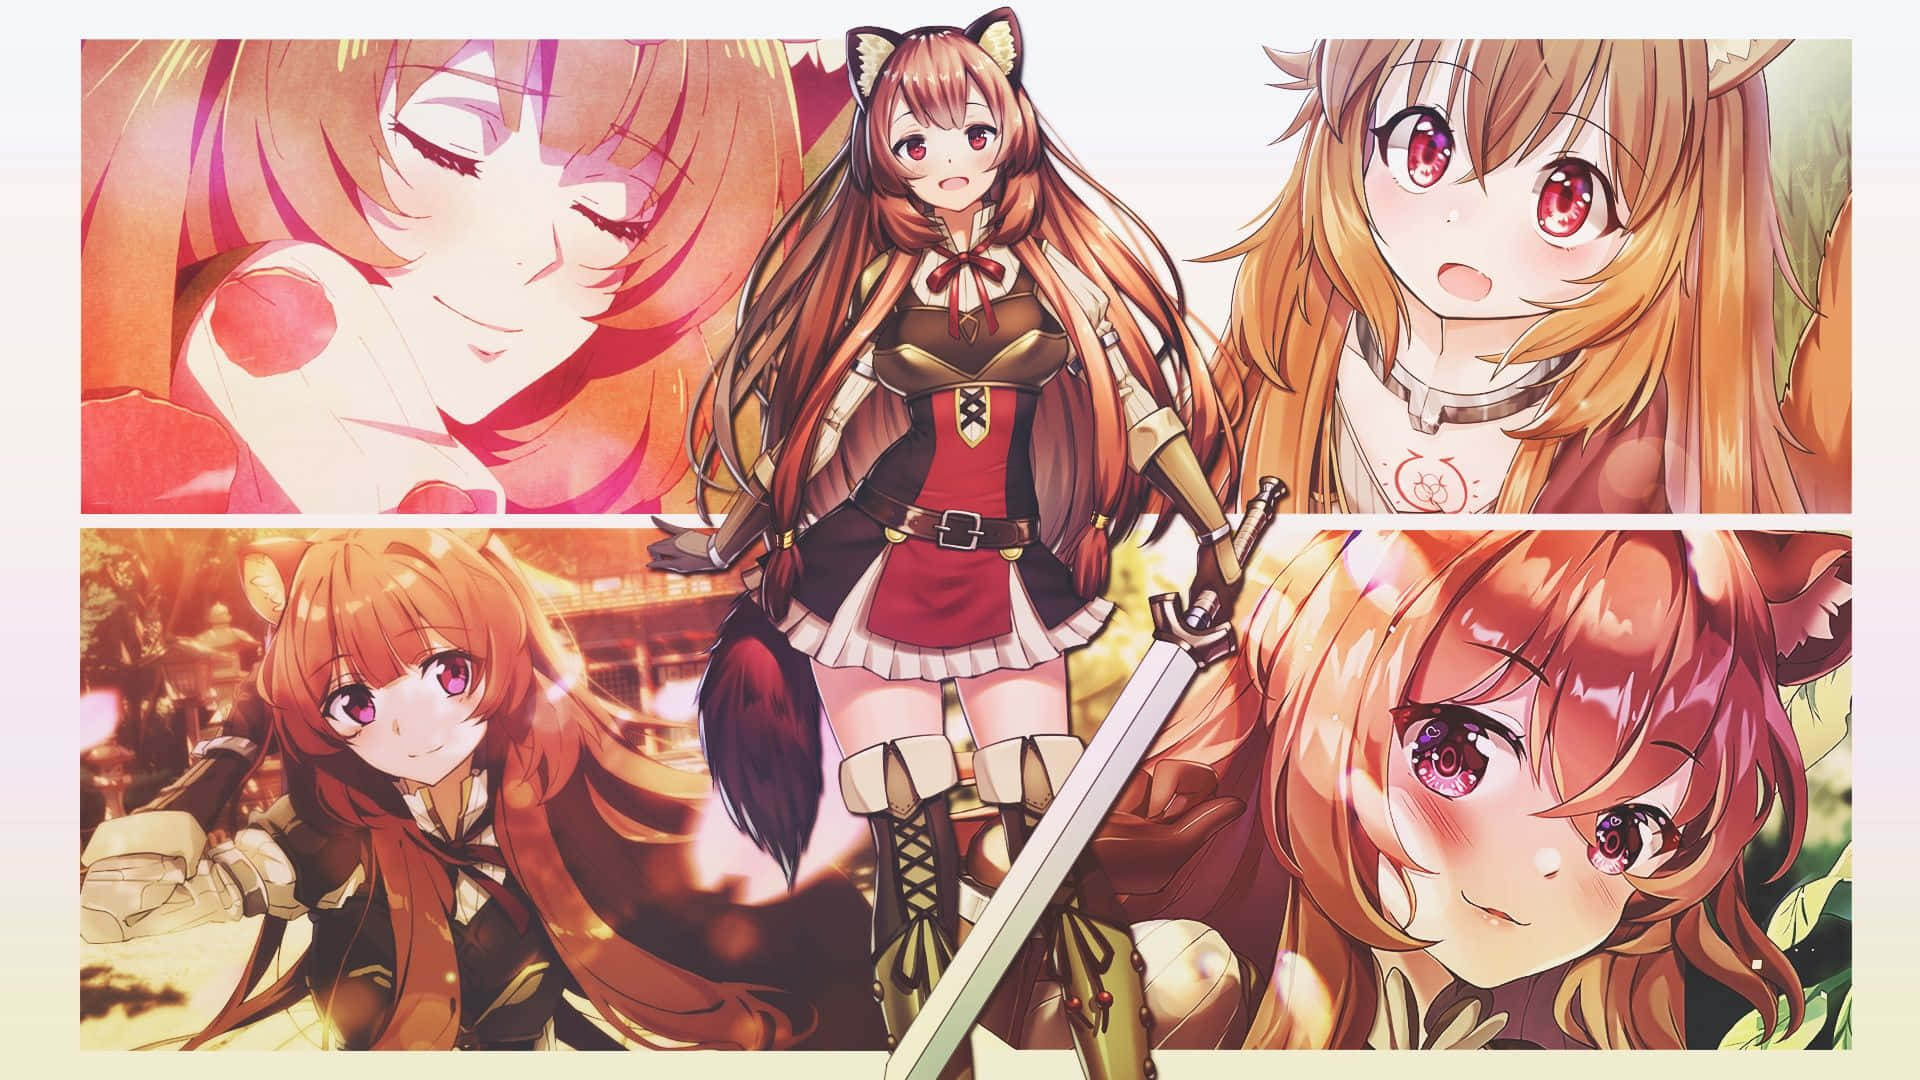 Raphtalia, a heroine blessed with strength and courage